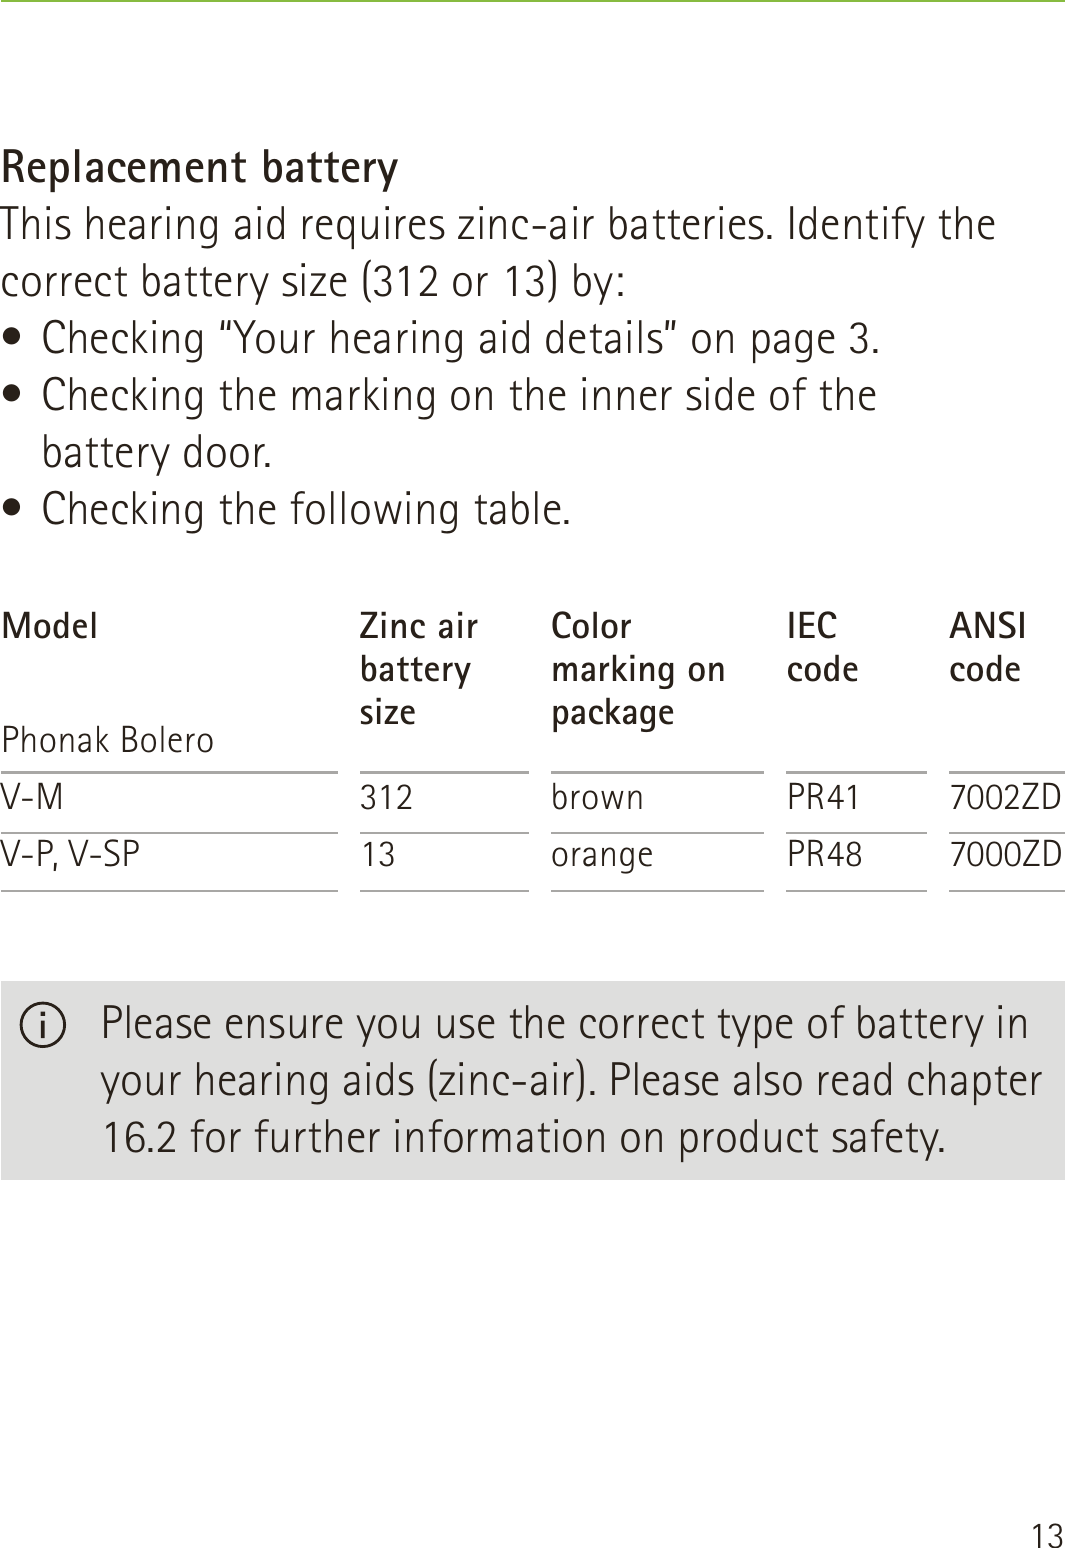 13ModelPhonak BoleroV-MV-P, V-SPZinc air battery size31213Color marking on packagebrownorangeIEC  codePR41PR48ANSI  code7002ZD7000ZDReplacement batteryThis hearing aid requires zinc-air batteries. Identify the correct battery size (312 or 13) by:• Checking “Your hearing aid details” on page 3.• Checking the marking on the inner side of the  battery door.• Checking the following table.   Please ensure you use the correct type of battery in your hearing aids (zinc-air). Please also read chapter 16.2 for further information on product safety.